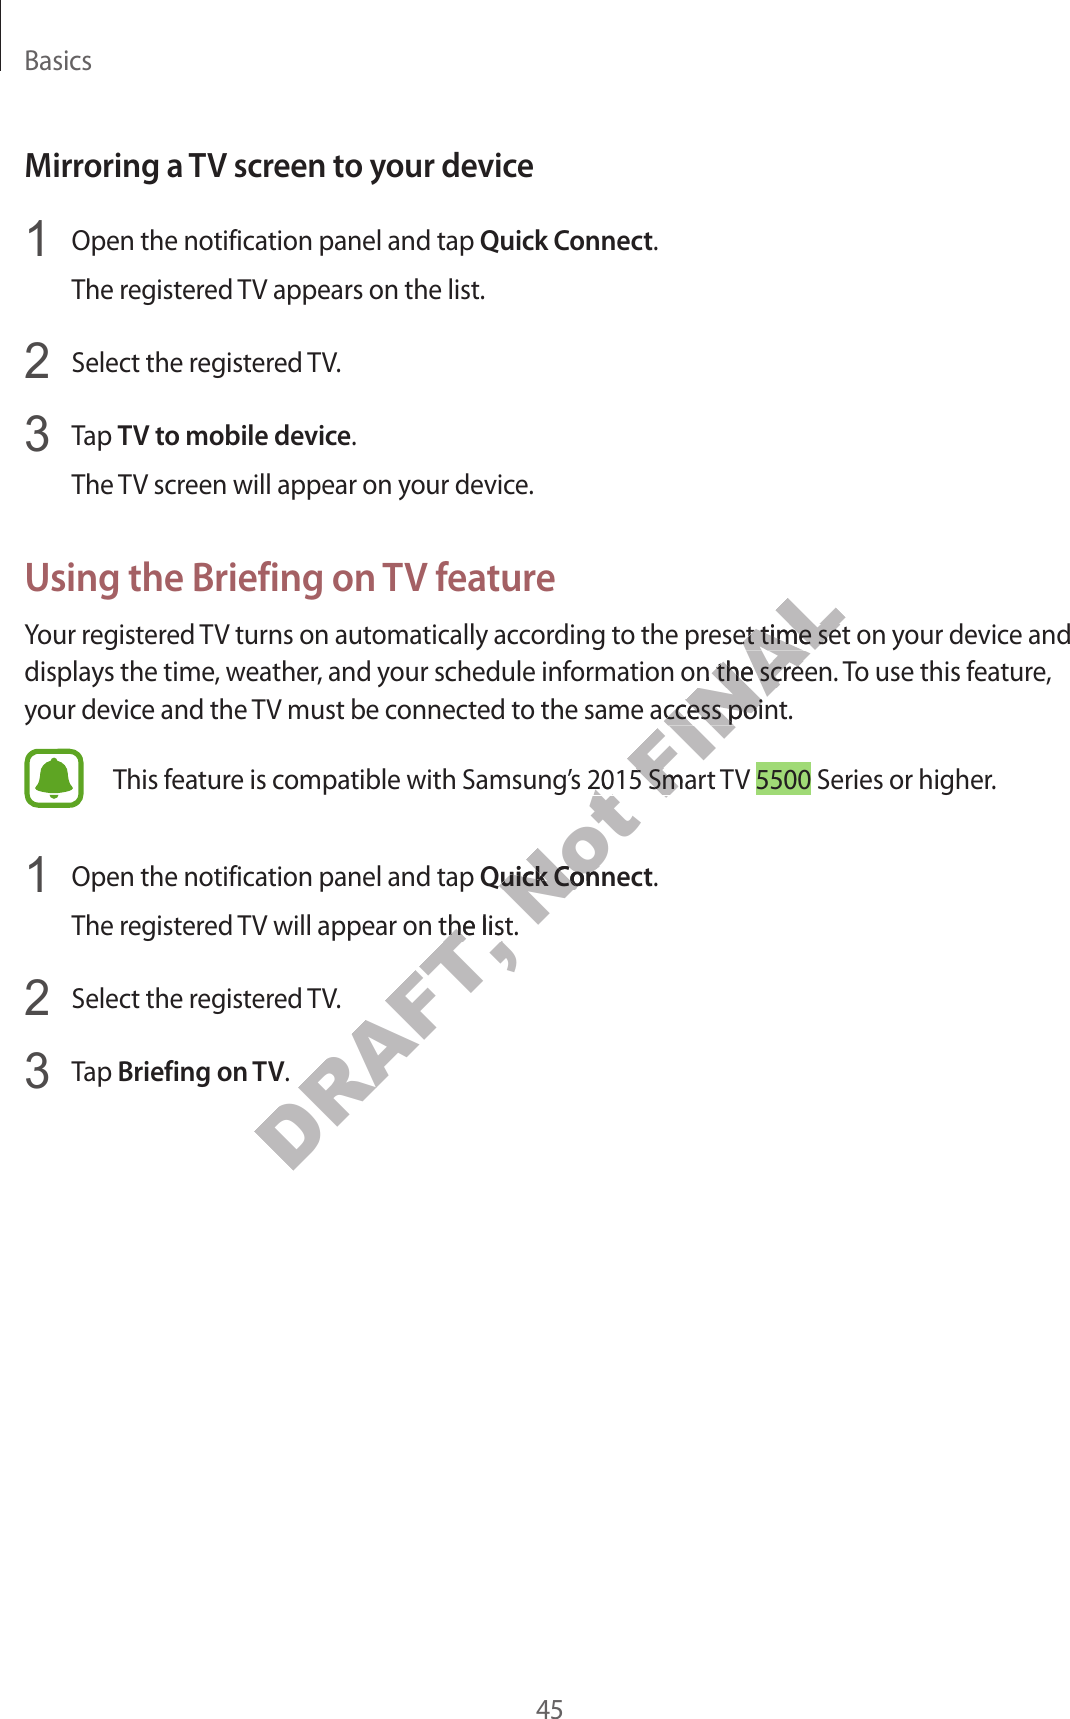 Basics45Mirroring a TV screen to y our devic e1  Open the notification panel and tap Quick Connect.The reg ist er ed TV appears on the list.2  Select the reg ister ed TV.3  Tap TV to mobile device.The TV screen will appear on your devic e .Using the Briefing on TV fea tur eYour register ed TV turns on automatically accor ding t o the pr eset time set on y our device and displays the time , w ea ther, and your schedule information on the scr een. To use this feature , your device and the TV must be connected to the same access point.This f eatur e is c ompatible with Samsung’s 2015 Smart TV 5500 Series or higher.1  Open the notification panel and tap Quick Connect.The reg ist er ed TV will appear on the list.2  Select the reg ister ed TV.3  Tap Briefing on TV.DRAFT, The reg ist er ed TV will appear on the list.DRAFT, The reg ist er ed TV will appear on the list.Not This f eatur e is c ompatible with Samsung’s 2015 Smart TV Not This f eatur e is c ompatible with Samsung’s 2015 Smart TV Not Quick ConnectNot Quick ConnectFINALYour register ed TV turns on automatically accor ding t o the pr eset time set on y our device and FINALYour register ed TV turns on automatically accor ding t o the pr eset time set on y our device and displays the time , w ea ther, and your schedule information on the scr een. To use this feature , FINALdisplays the time , w ea ther, and your schedule information on the scr een. To use this feature , your device and the TV must be connected to the same access point.FINALyour device and the TV must be connected to the same access point.This f eatur e is c ompatible with Samsung’s 2015 Smart TV FINALThis f eatur e is c ompatible with Samsung’s 2015 Smart TV 